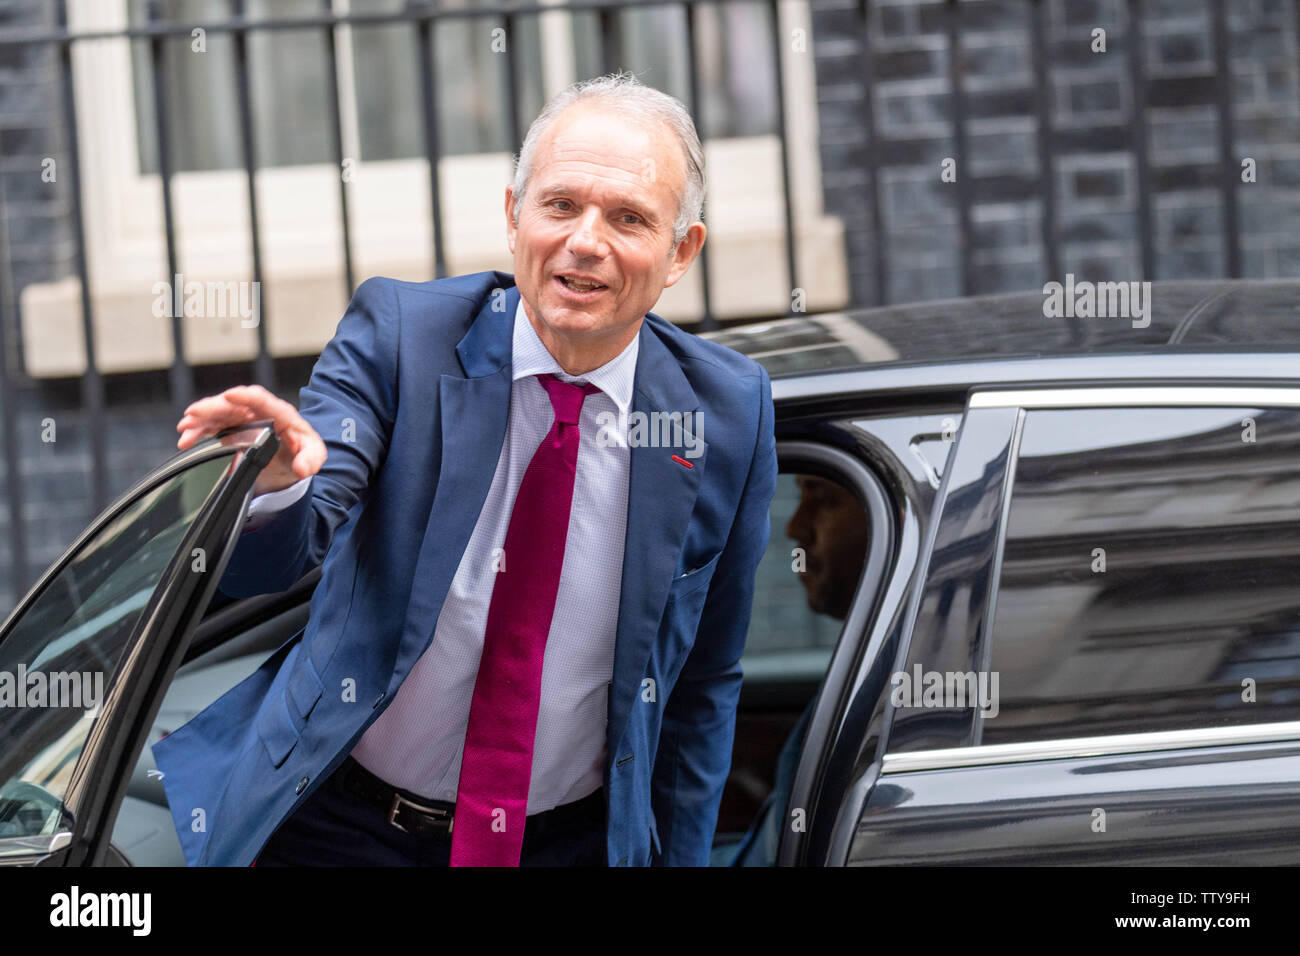 London, UK. 18th June, 2019. David Lidinton MP PC, Cabinet minister arrives at a Cabinet meeting at 10 Downing Street, London Credit: Ian Davidson/Alamy Live News Stock Photo